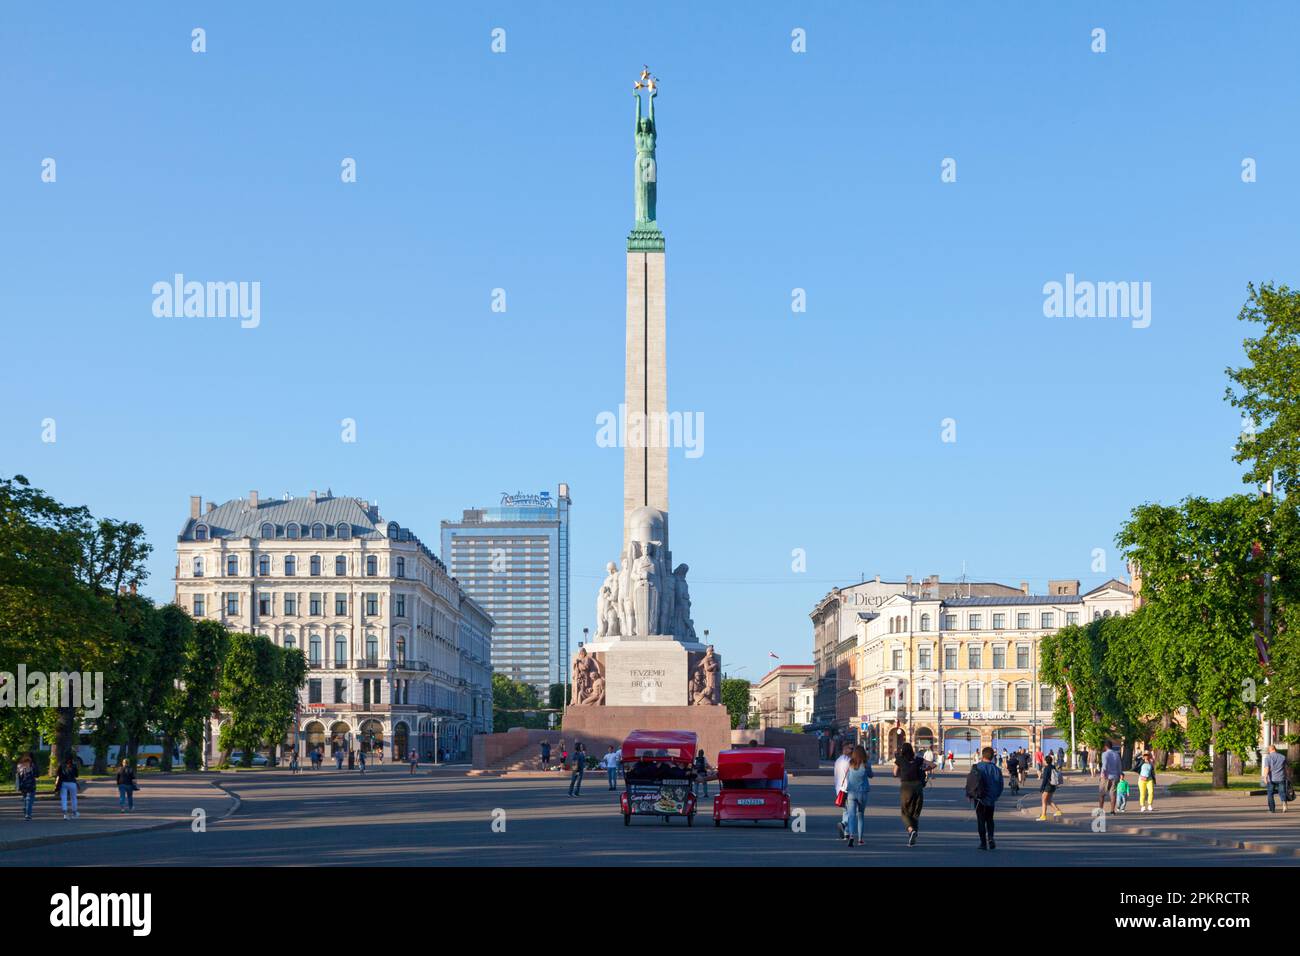 Riga, Latvia - June 14 2019: The Freedom Monument (Latvian: Brīvības piemineklis) is a memorial honouring soldiers killed during the Latvian War of In Stock Photo